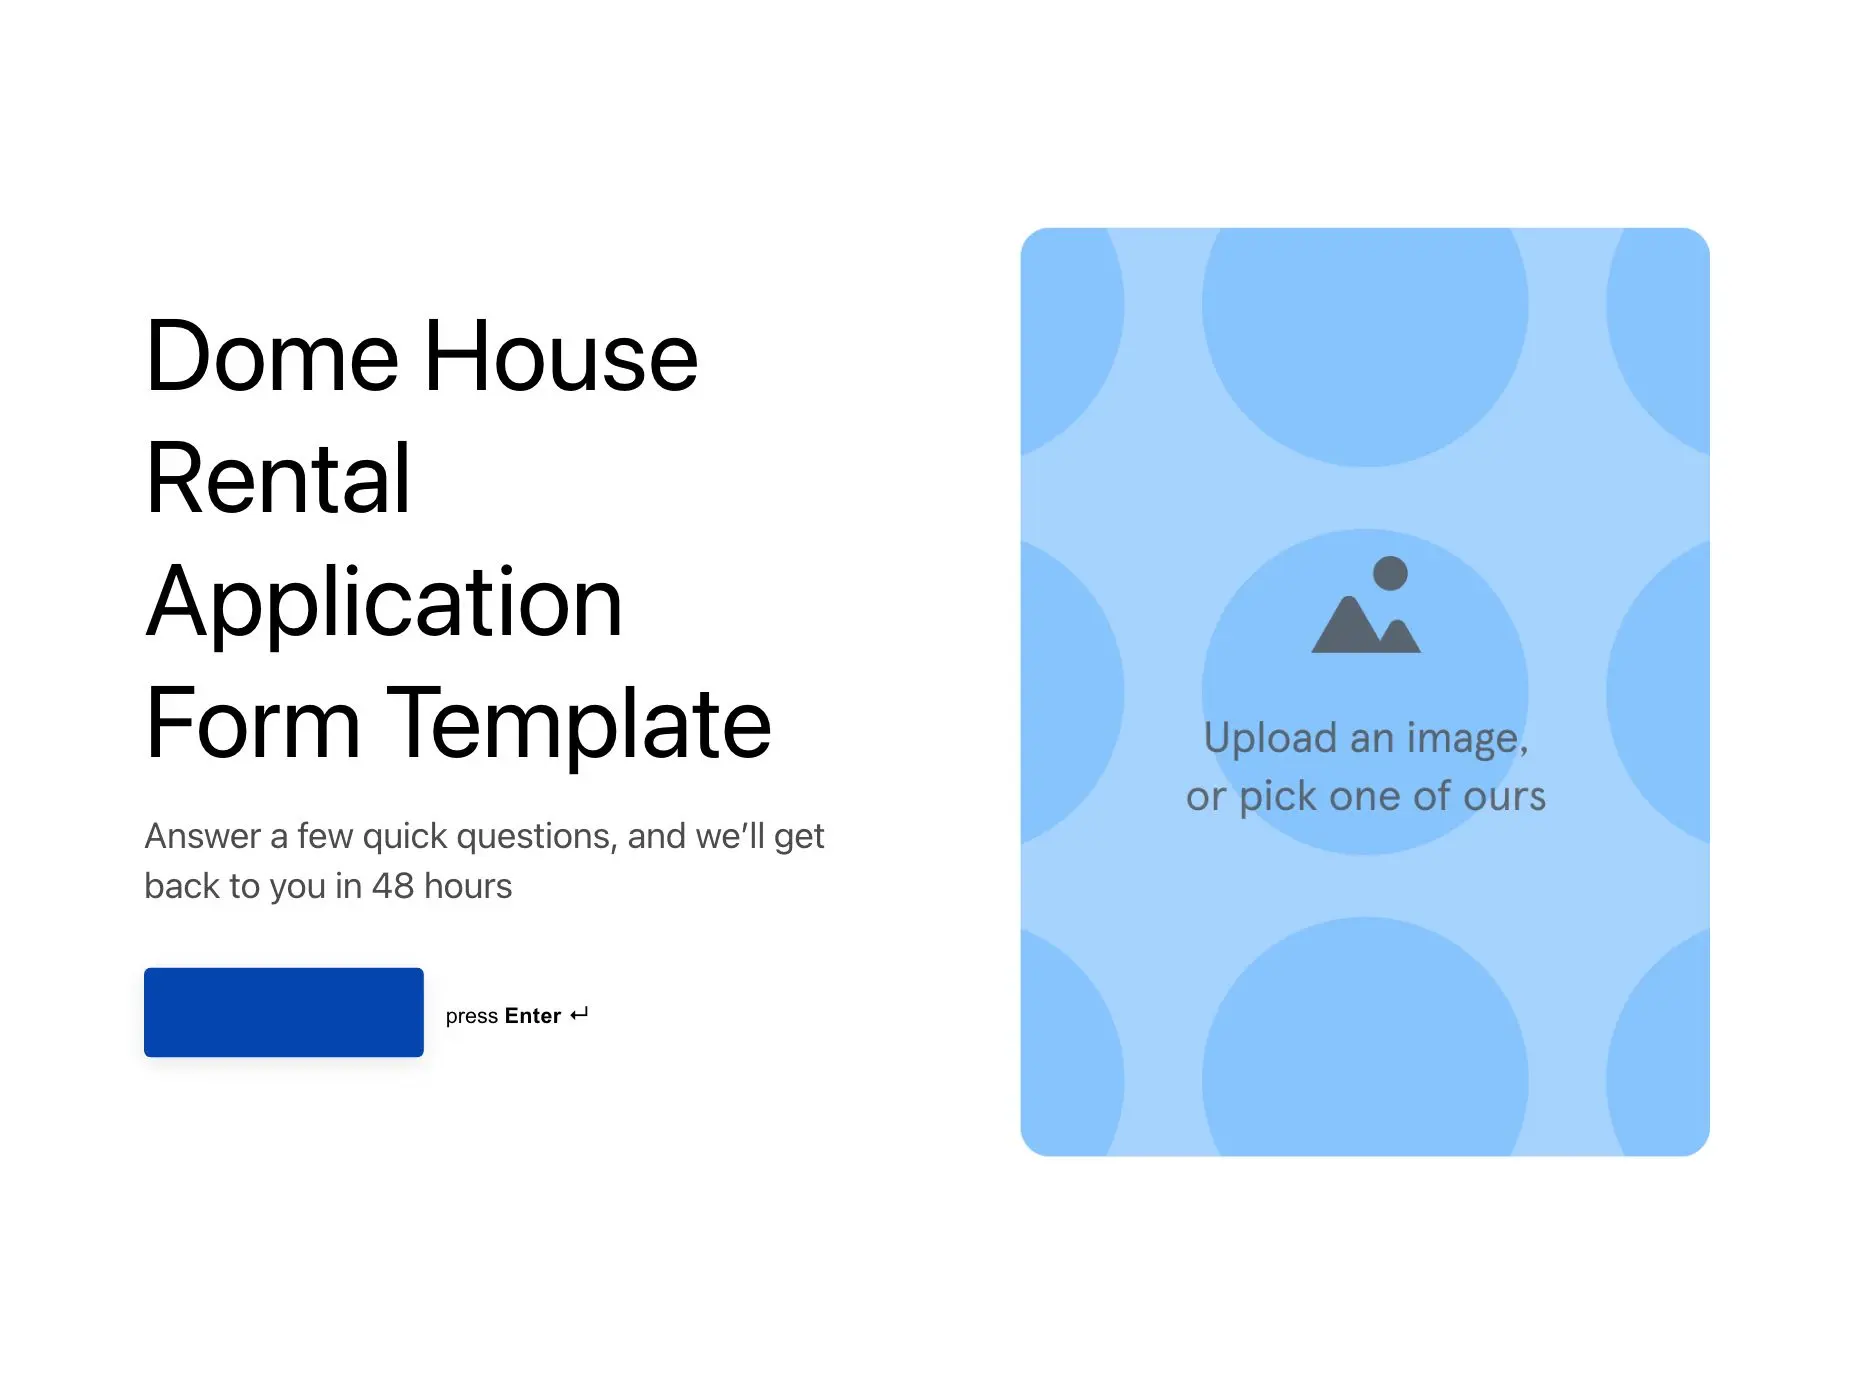 Dome House Rental Application Form Template Hero